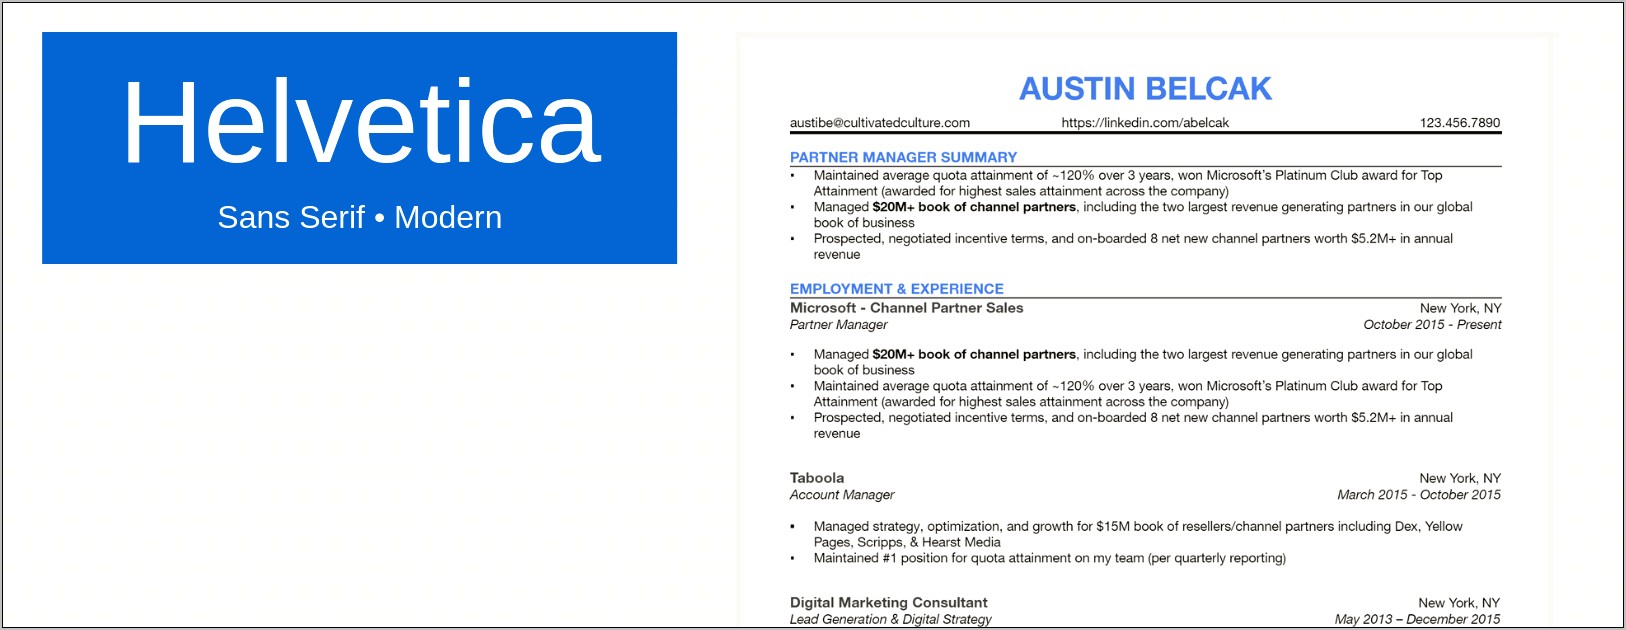 Best Font Size For Professional Resume